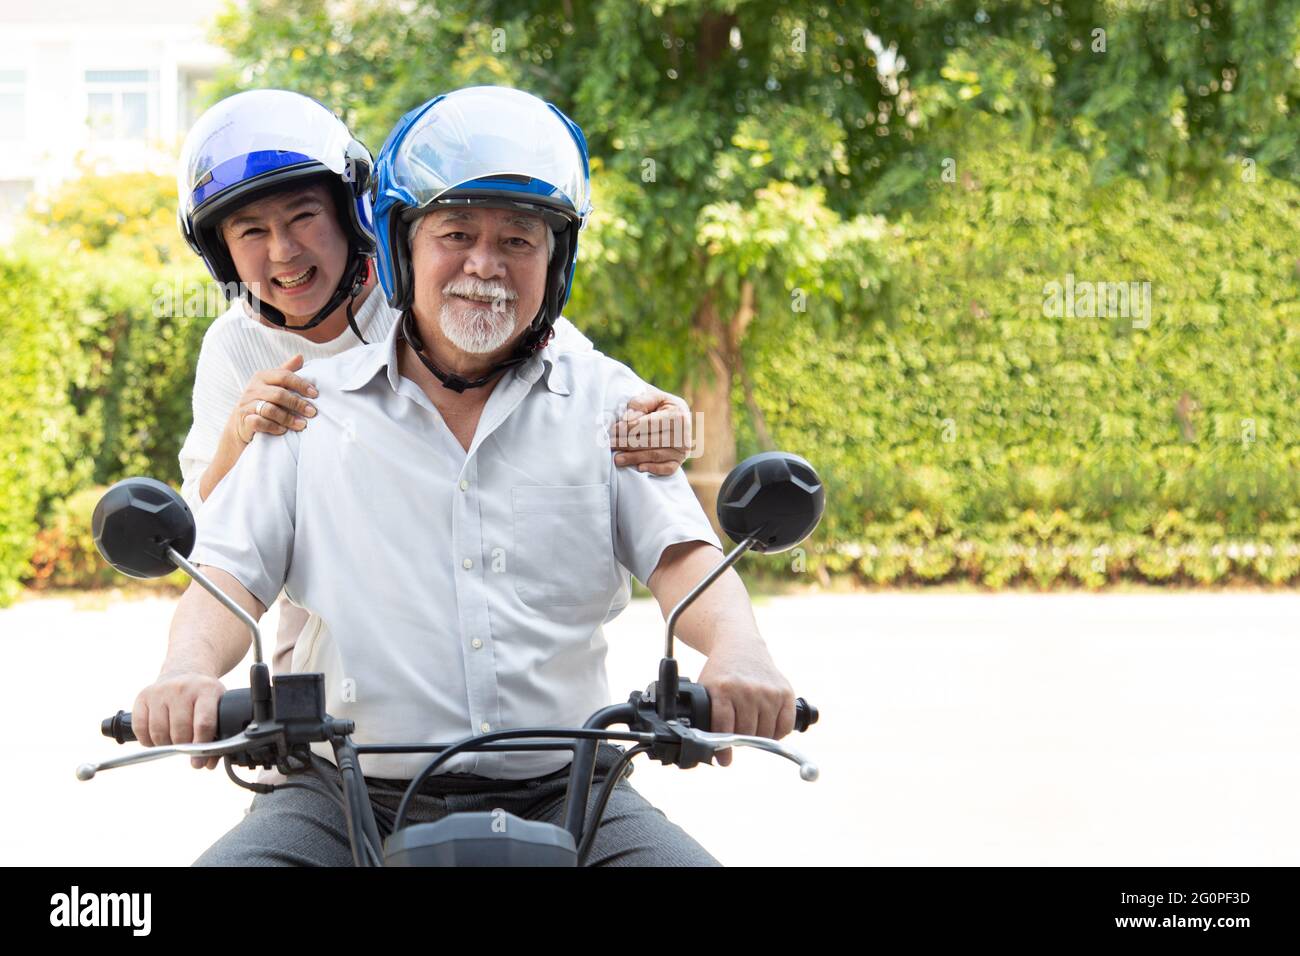 Senior asian couple riding motorcycle, Happy active old age and lifestyle concept Stock Photo